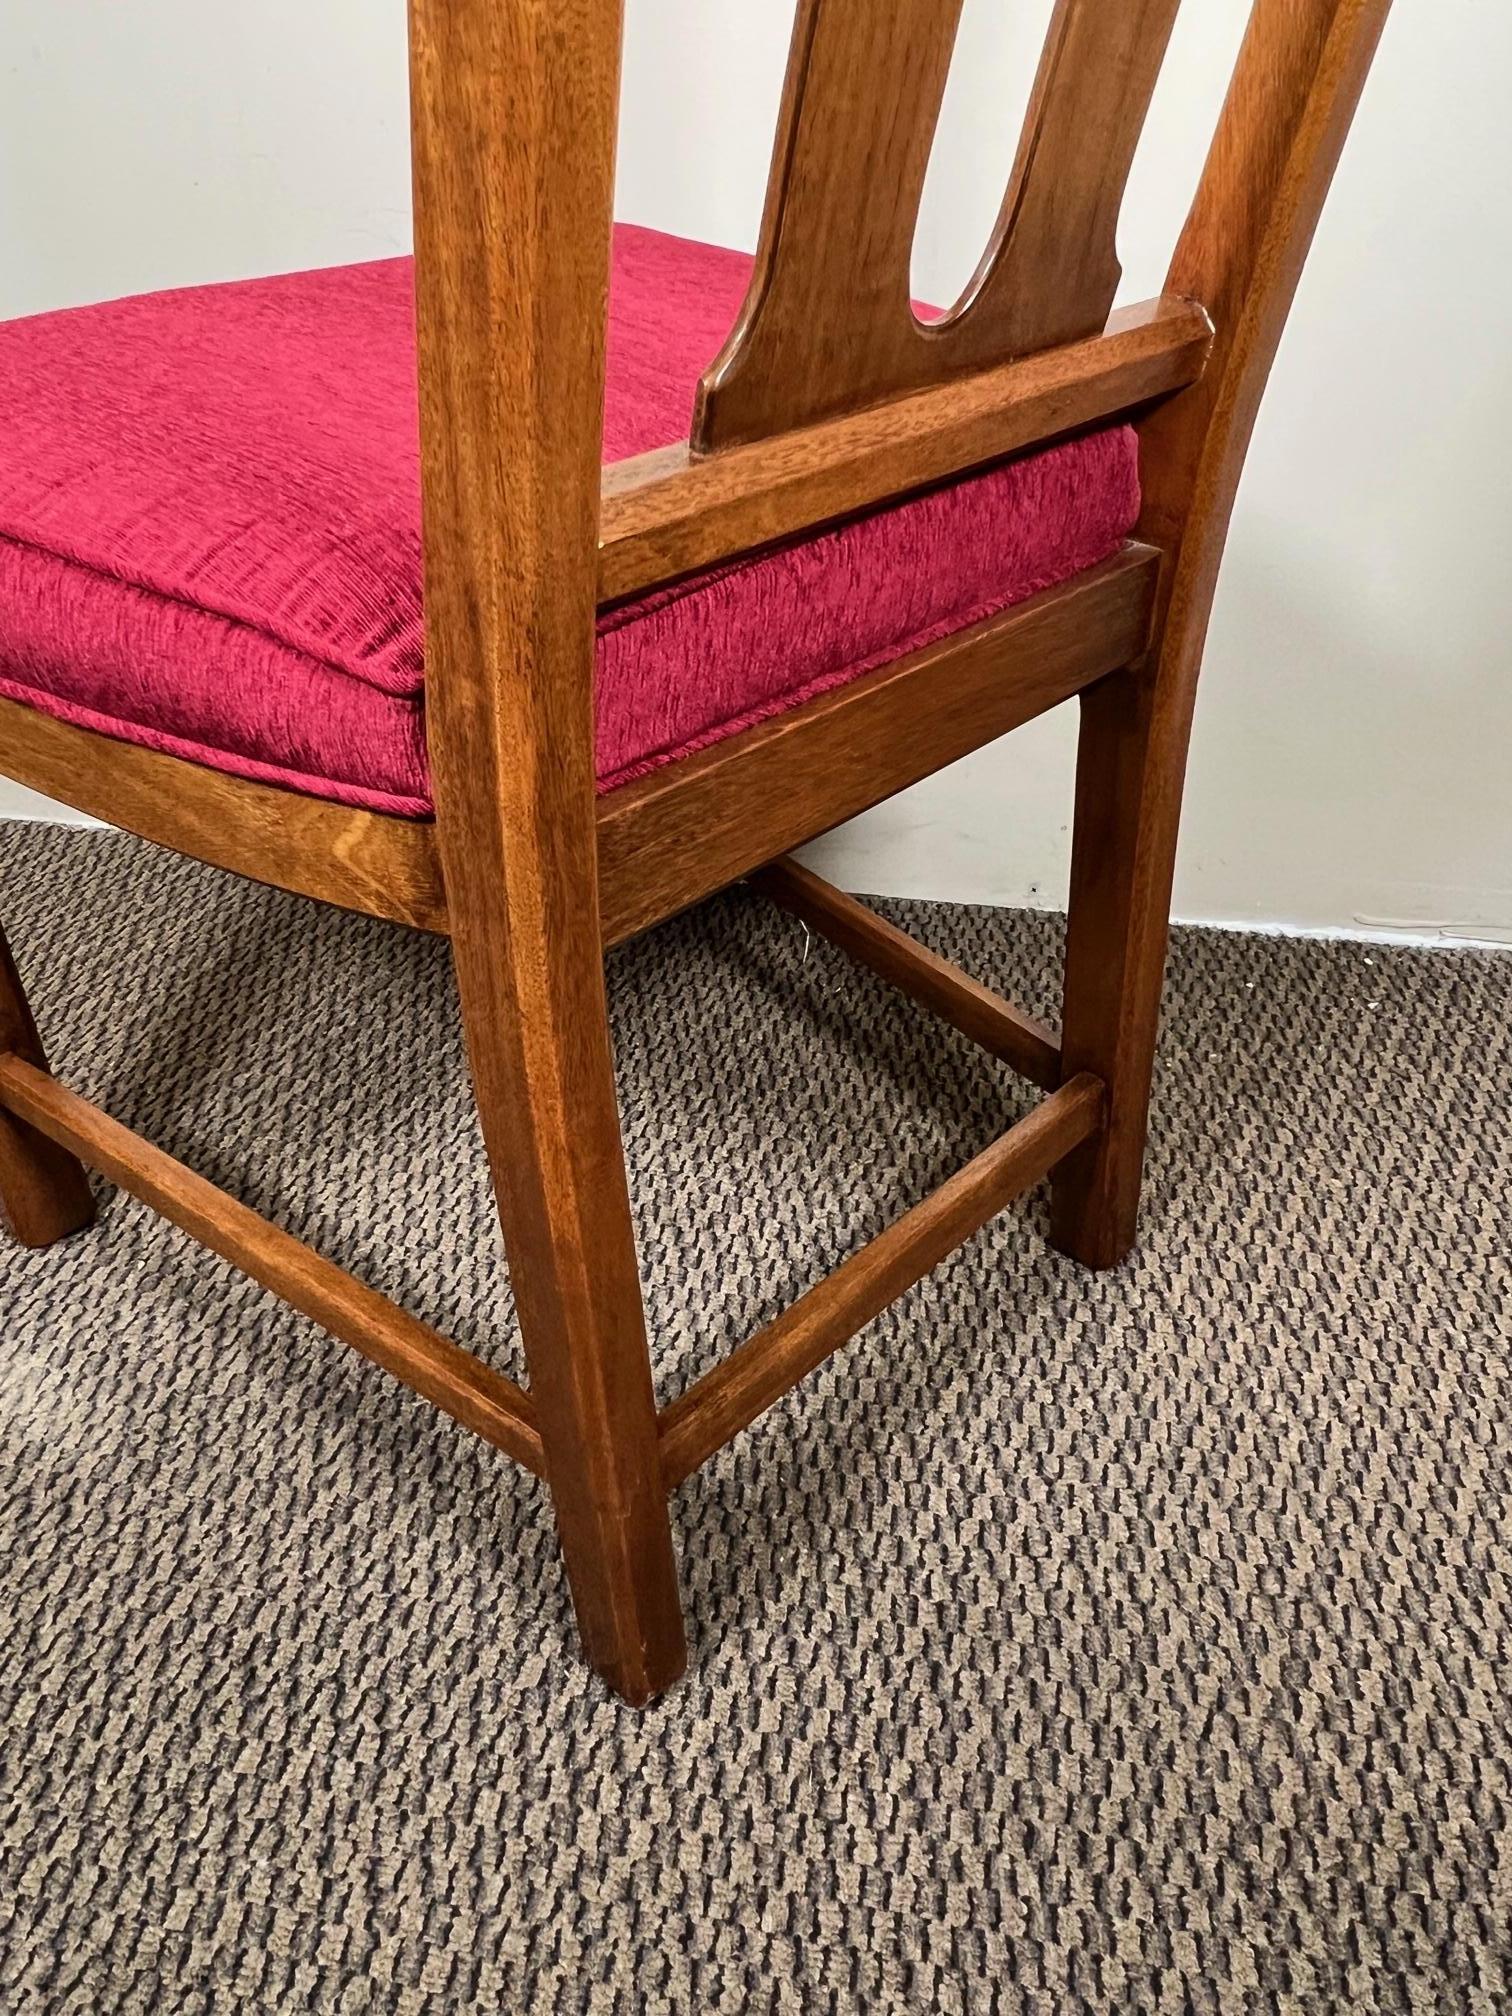 Set of 6 Mid-Century Modern Walnut Dining Chairs with Red Seats by Henredon For Sale 3